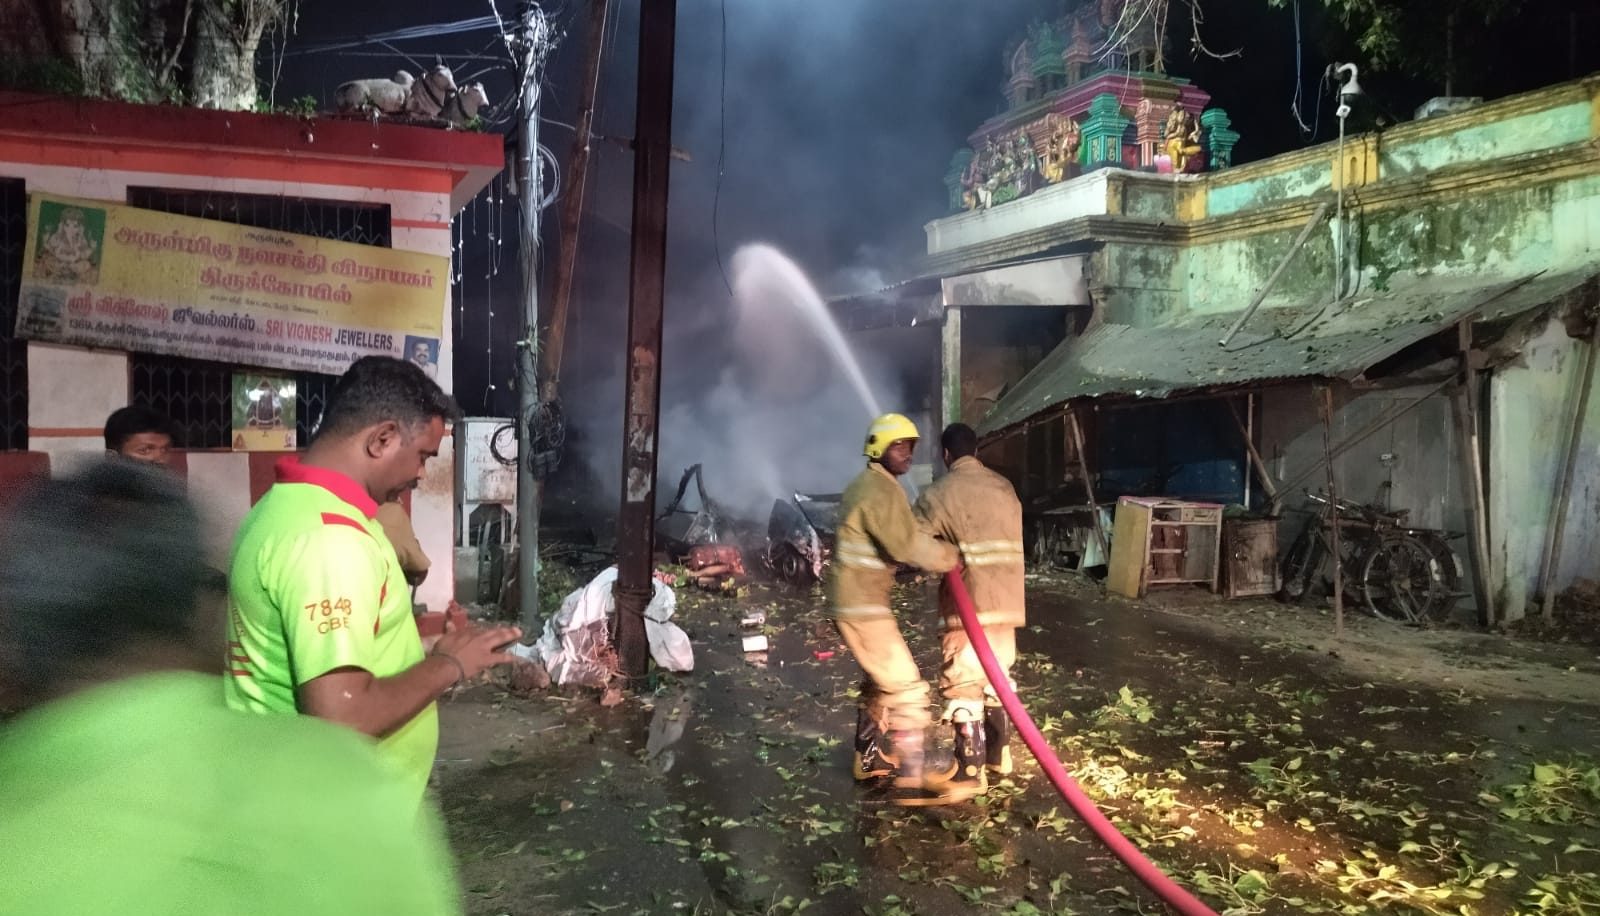 Firefighters at the scene of the Coimbatore blast. (Supplied)